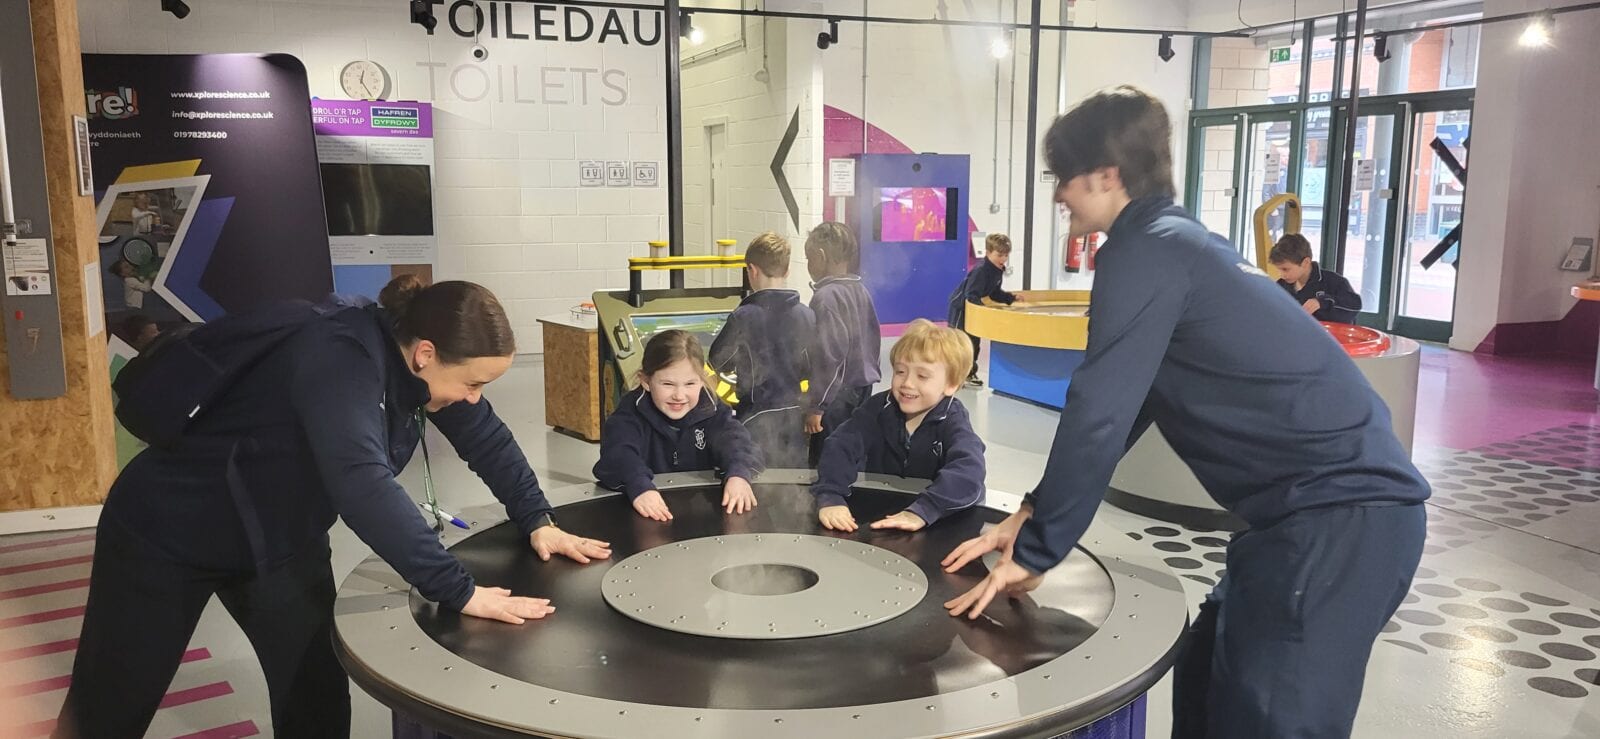 Young children at a science museum exploring activities